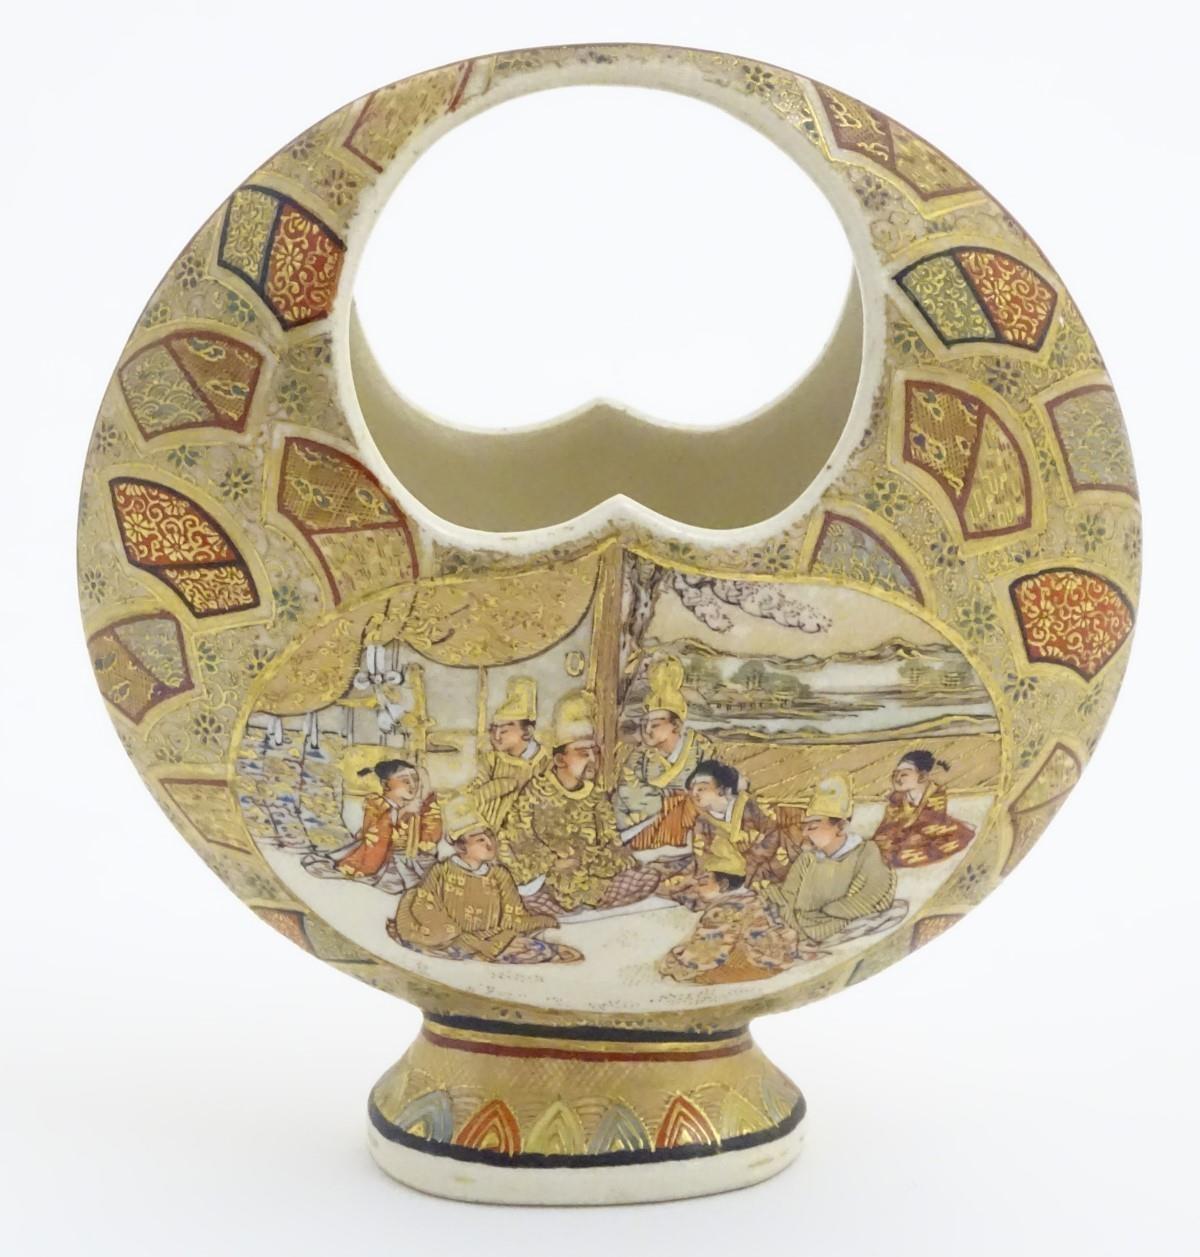 A Japanese satsuma moon basket vase with hand painted decoration depicting figures seated around - Image 10 of 20